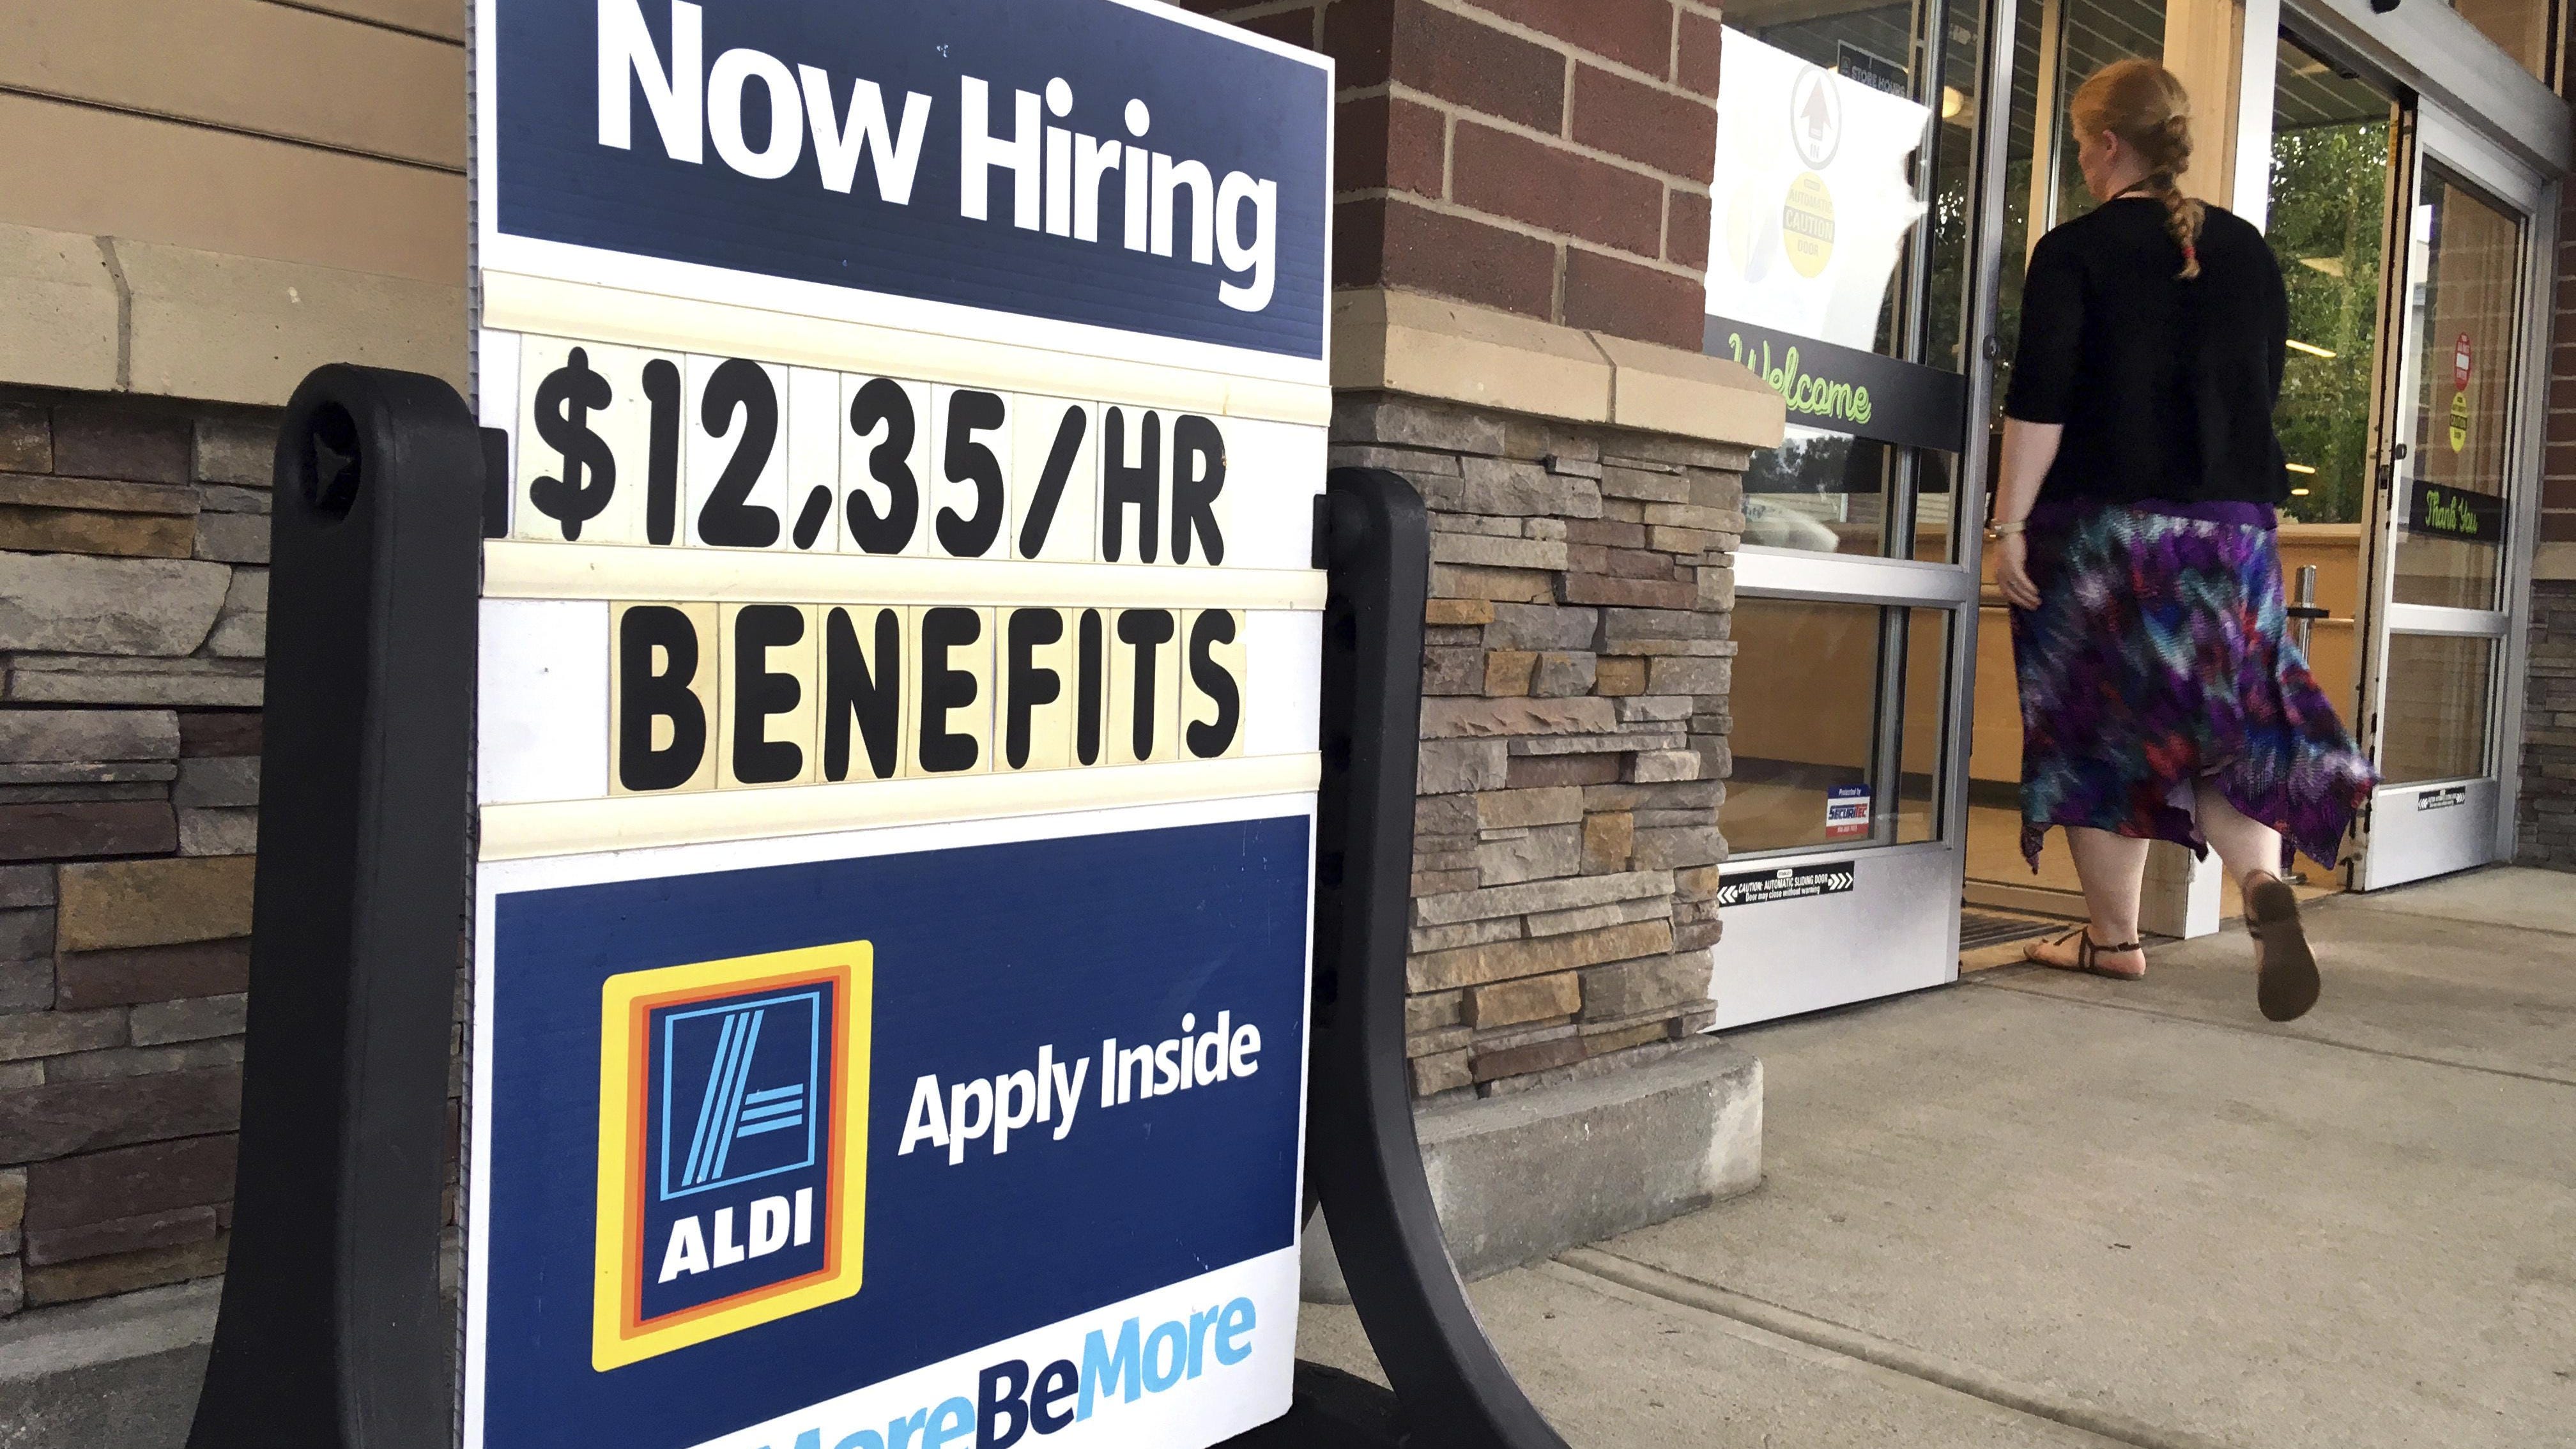 Michigan soon could enter the longest period of job growth since the World War II era, according to economists from the University of Michigan.